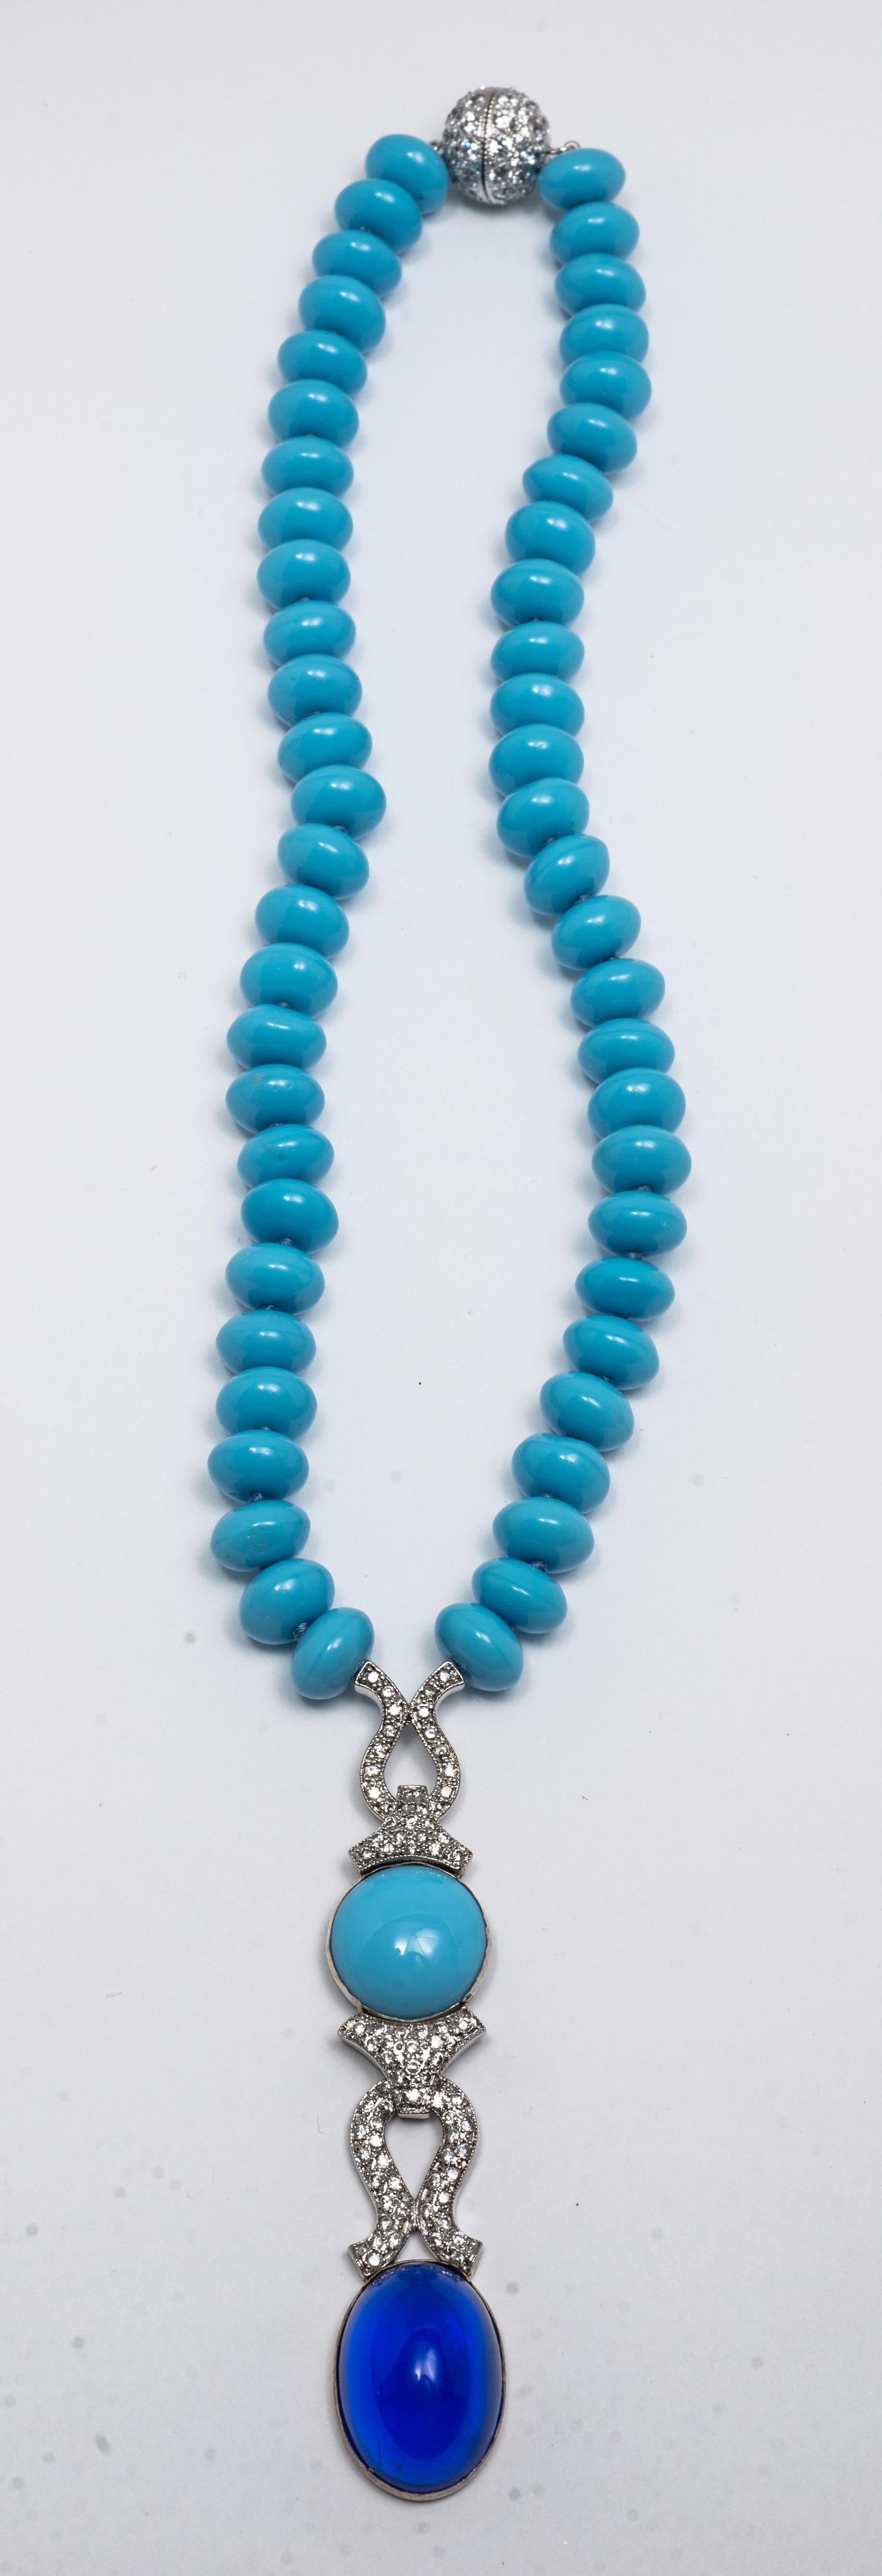 faux turquoise necklace